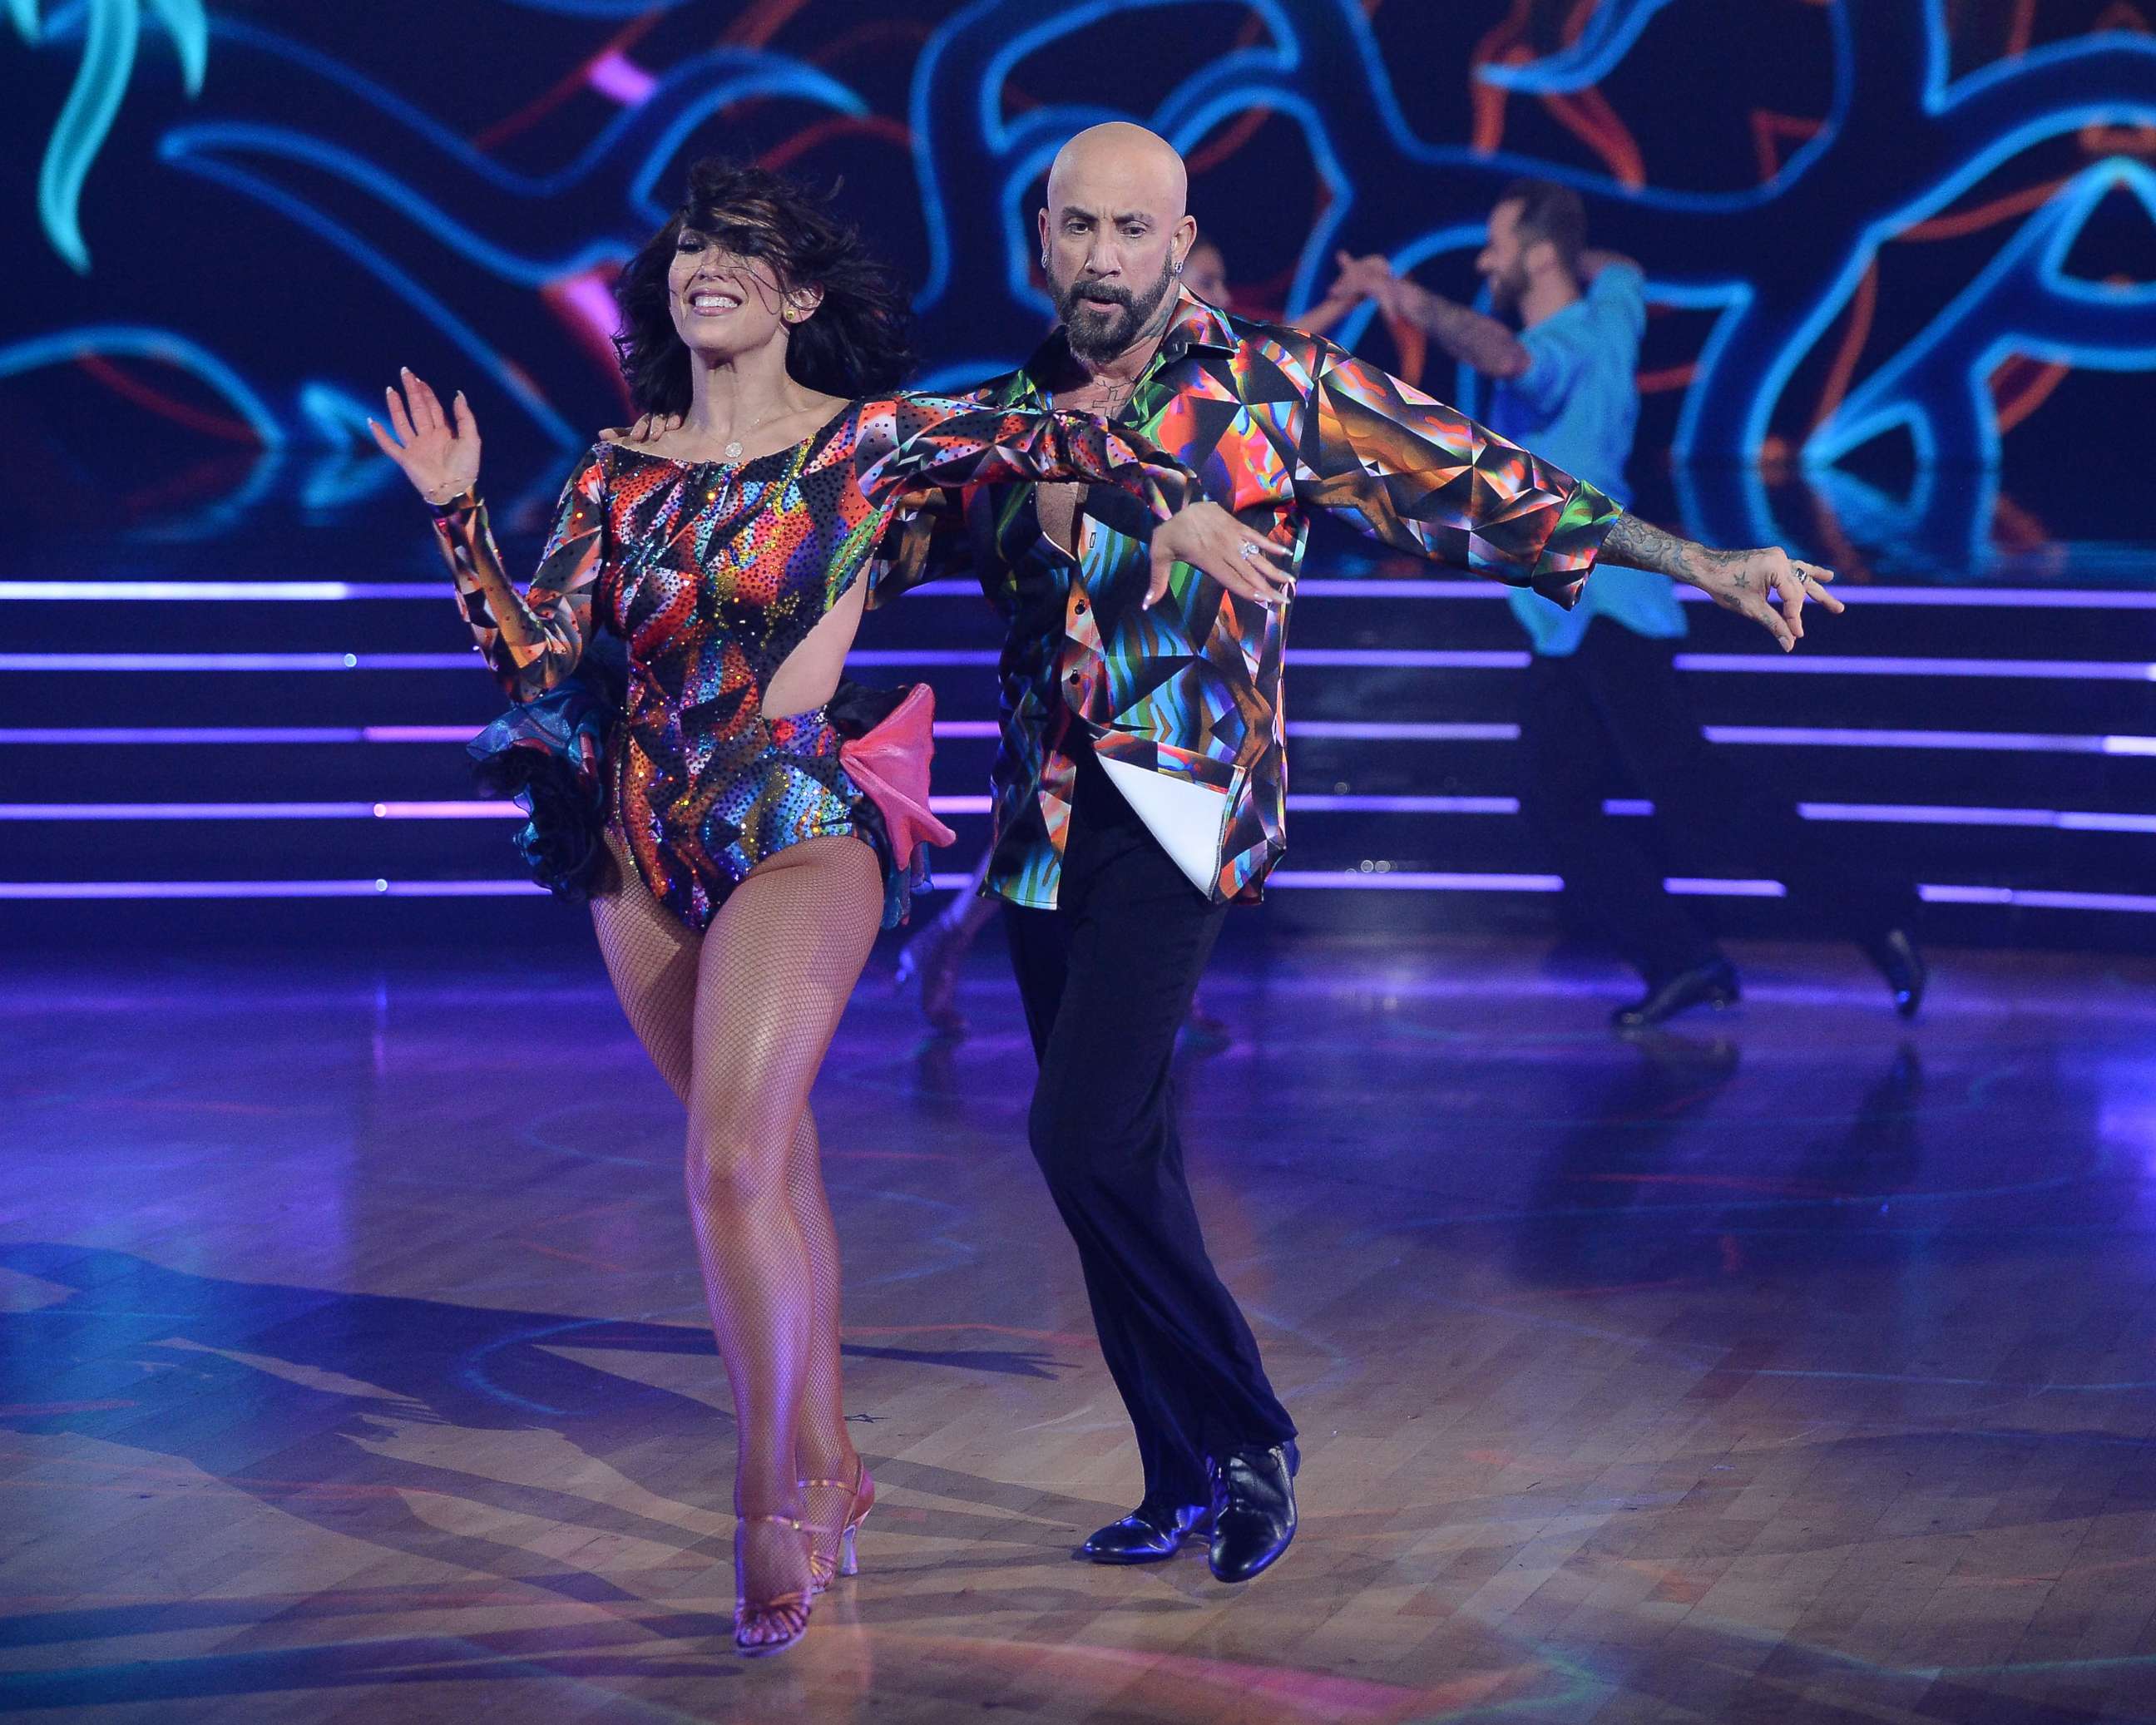 PHOTO: AJ McLean dances with his partner Cheryl Burke on Dancing With The Stars, Nov. 2, 2020.